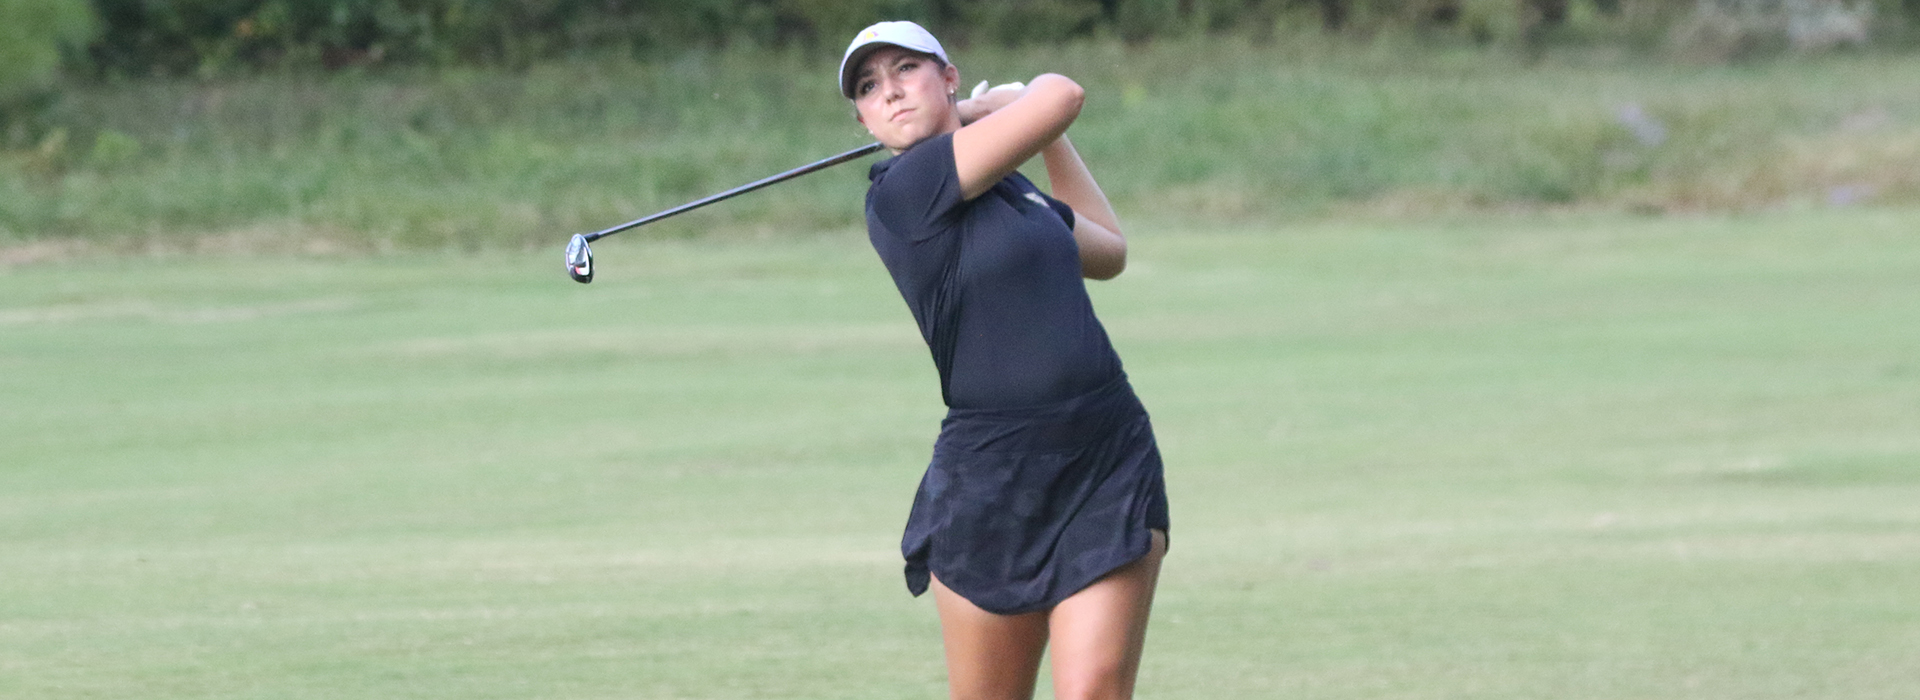 Sciolis shines as Golden Eagles rank seventh on day one of Terrier Intercollegiate